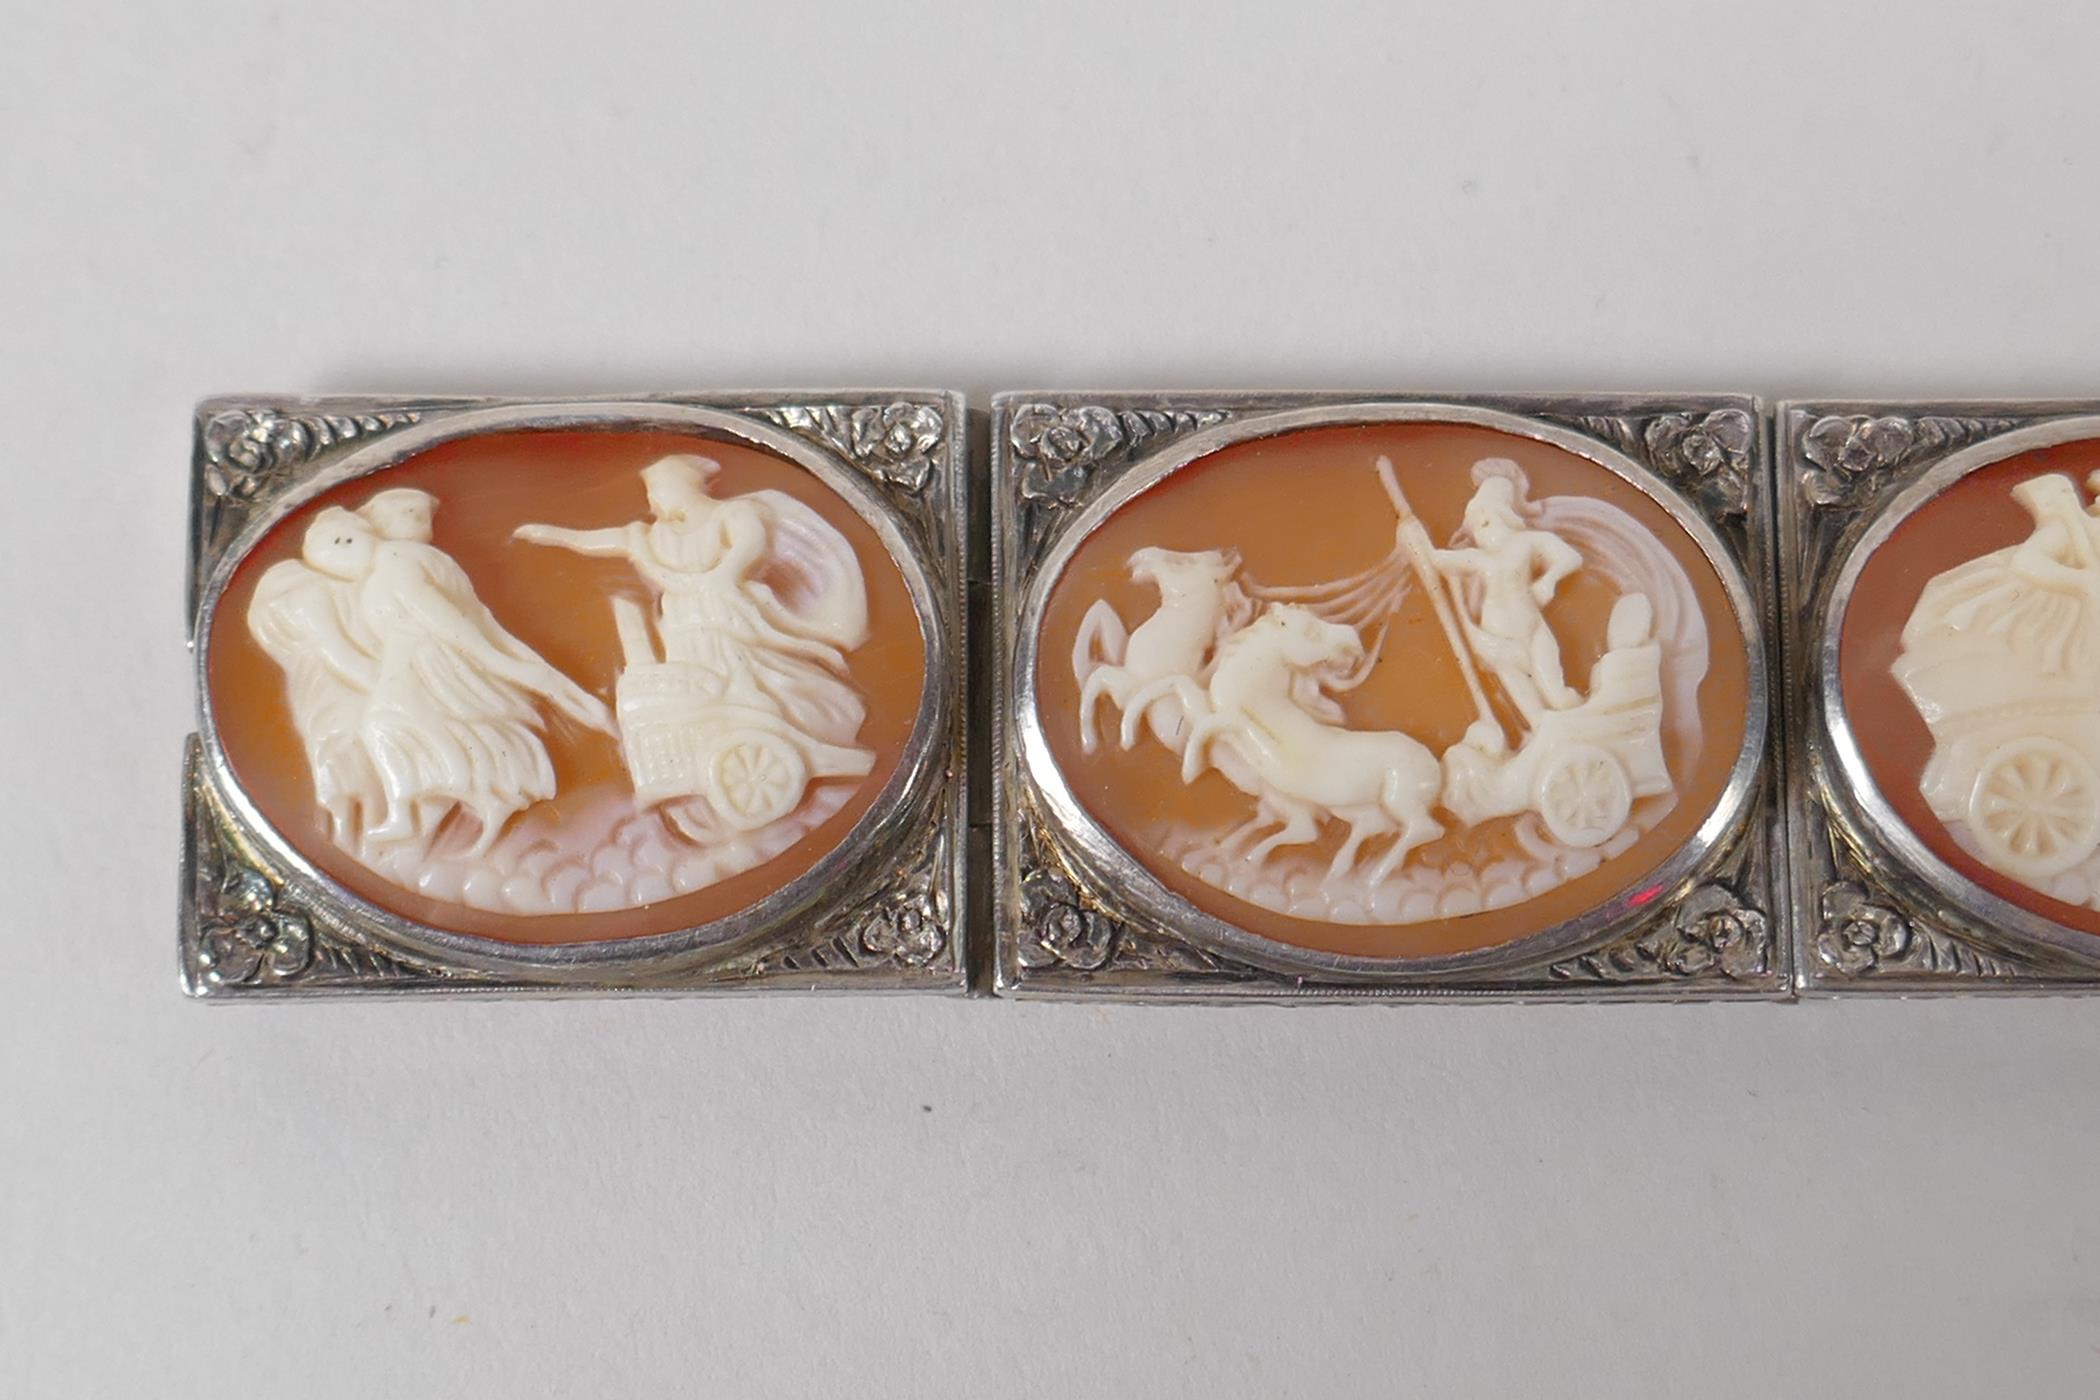 An antique silver cameo bracelet with Greco Roman decorative panels, and a matching ring, size L/M - Image 2 of 6